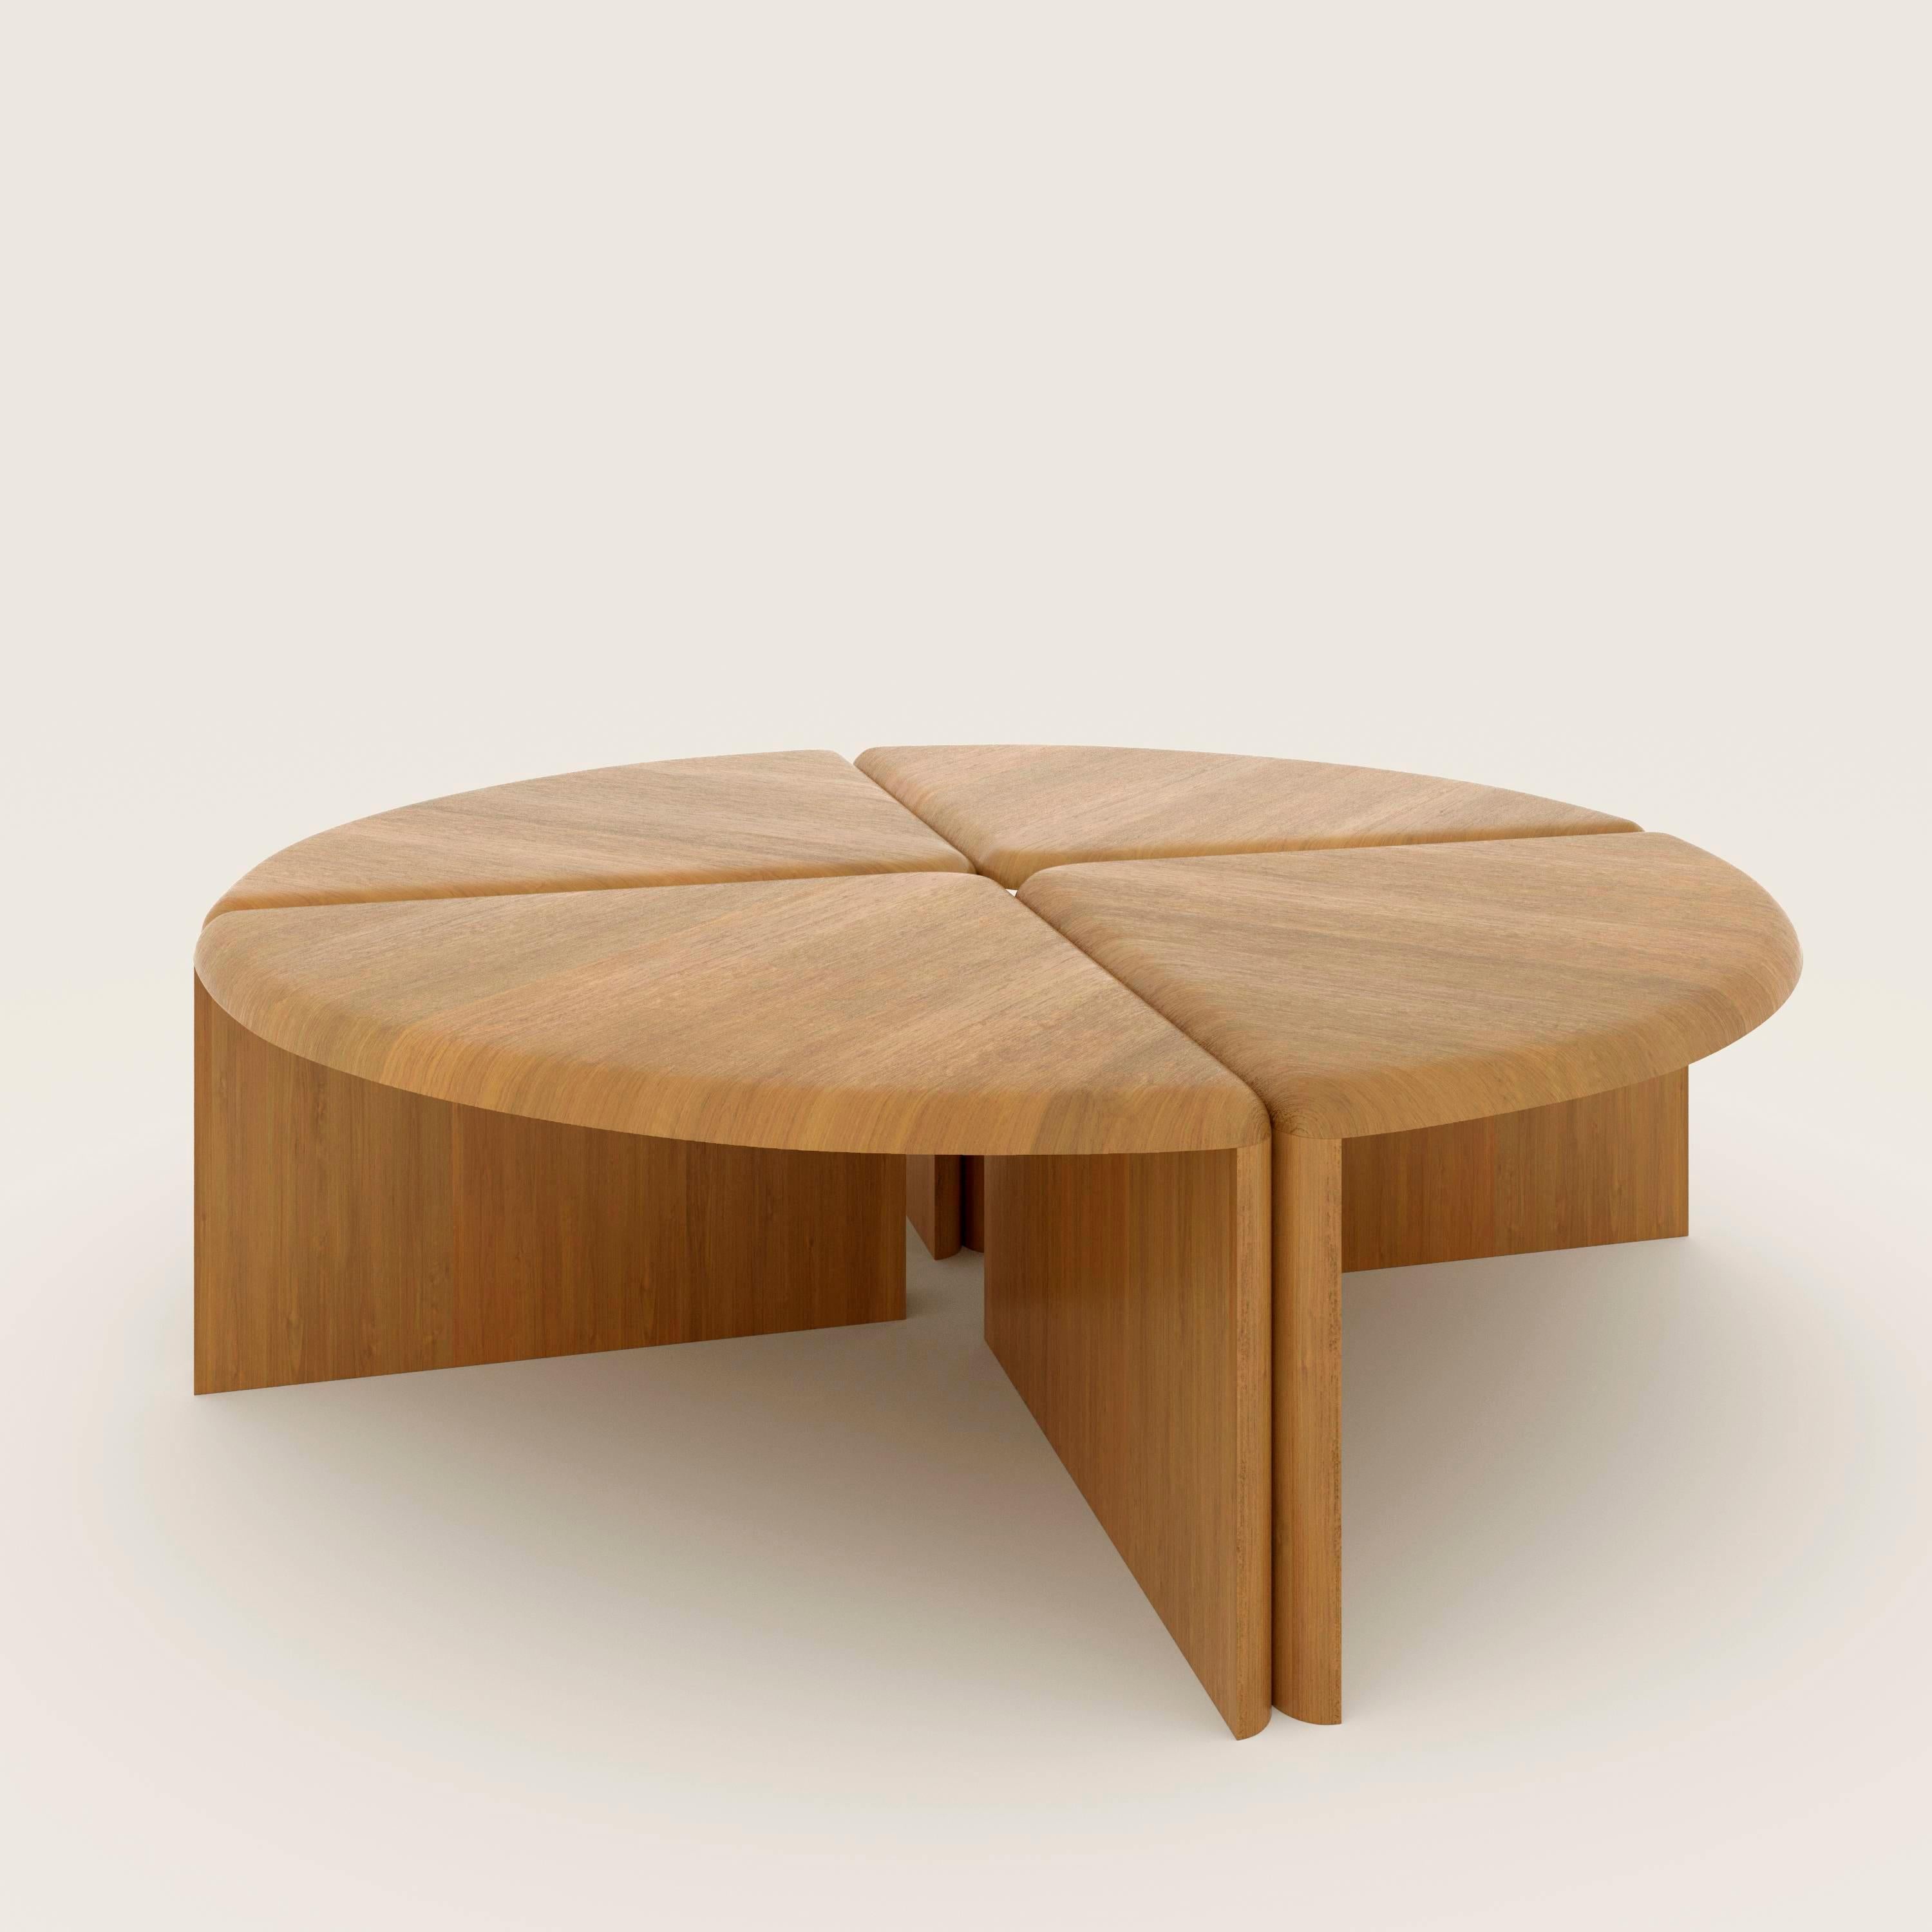 A coffee table handmade out of 30 mm thick solid natural French Oak wood. Inspired by lily pads and their curled edges, it’s divided in 4 quarters, with each part’s rounded edges juxtaposed to the adjacent parts’ edges. Available in any size and